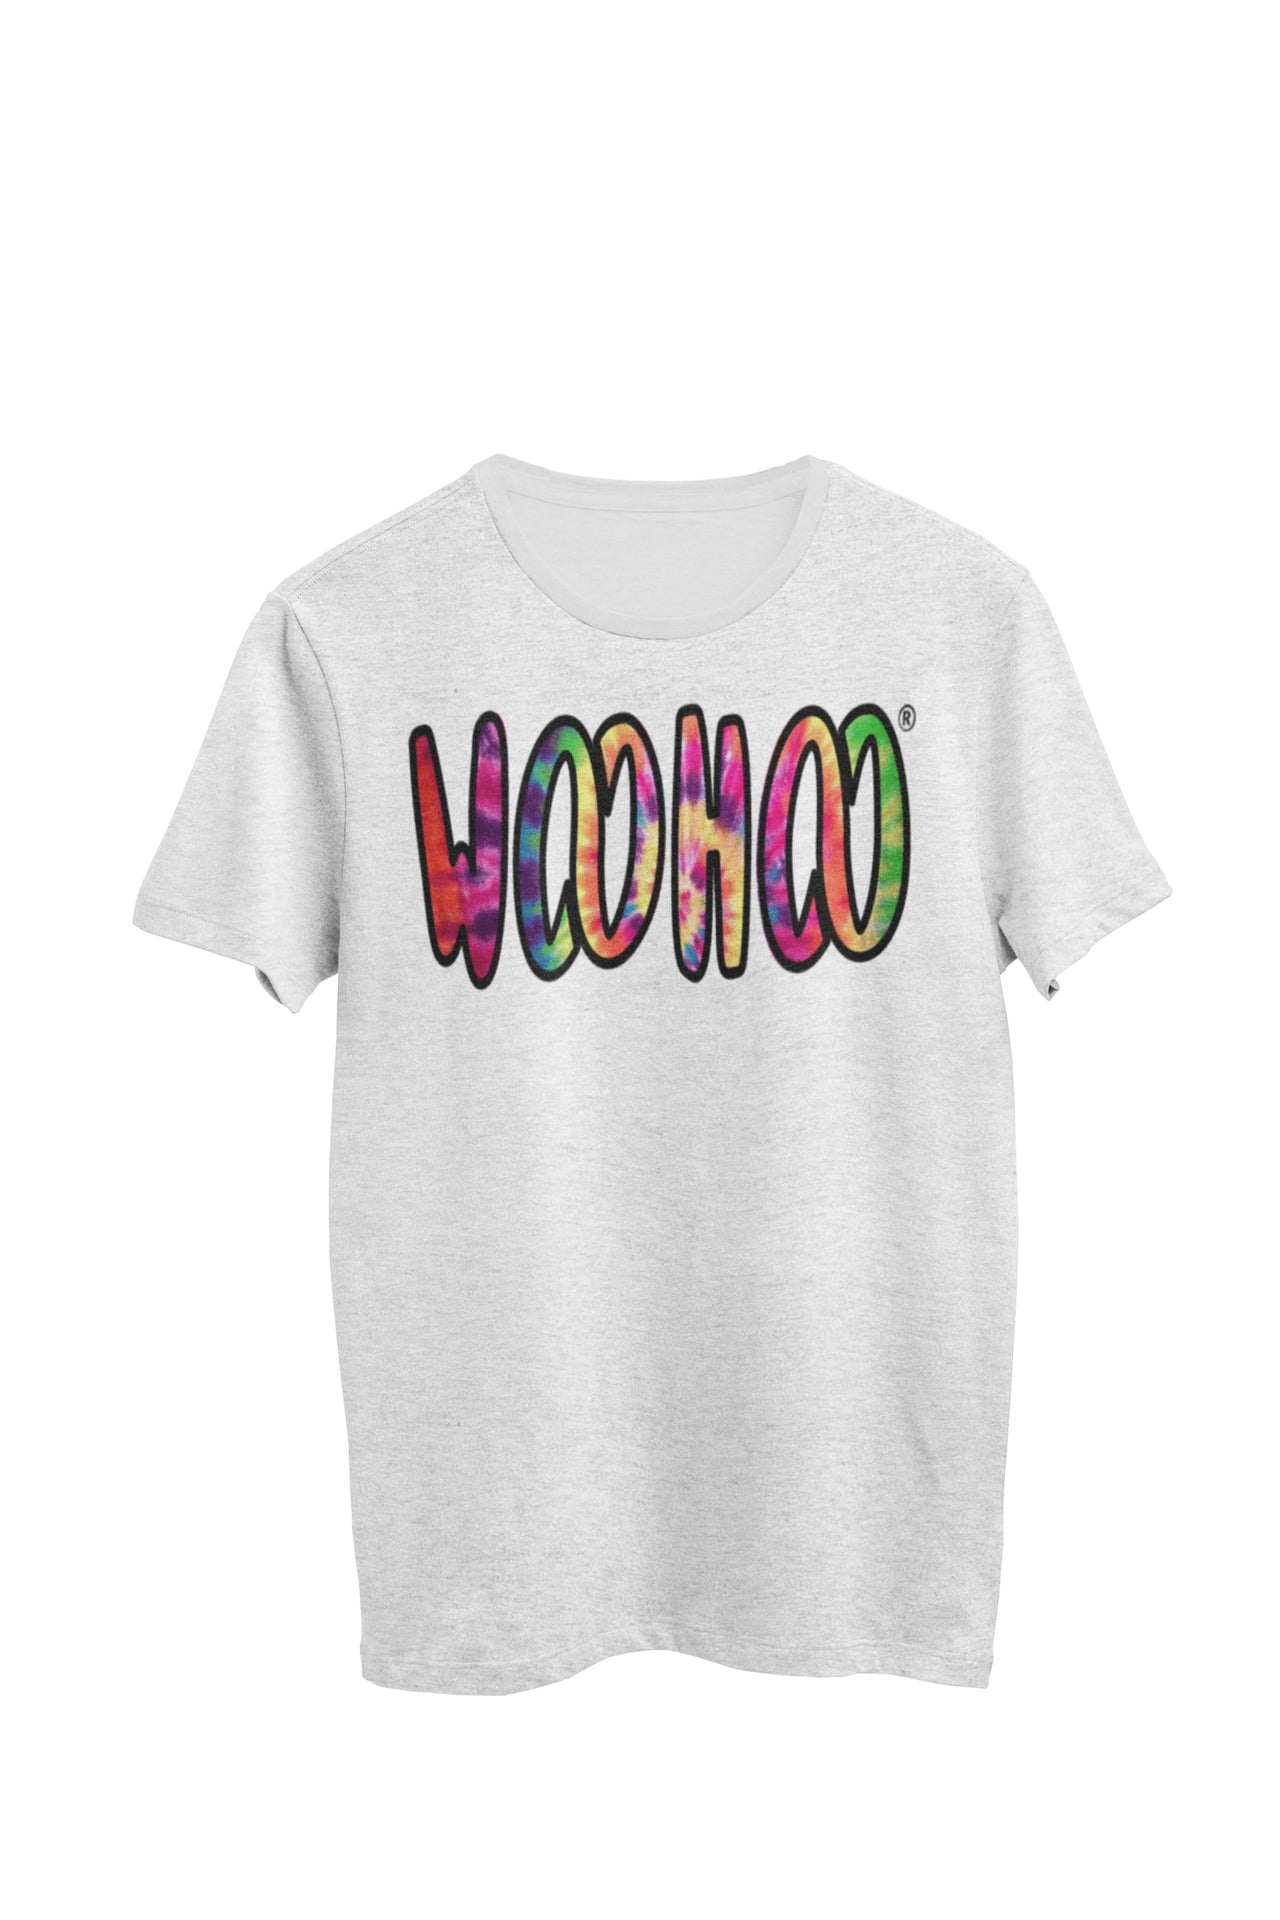 Heather gray unisex t-shirt designed by WooHoo Apparel. The design features a larger 'woohoo' font with tie-dye inside the outline, called energy spiral.